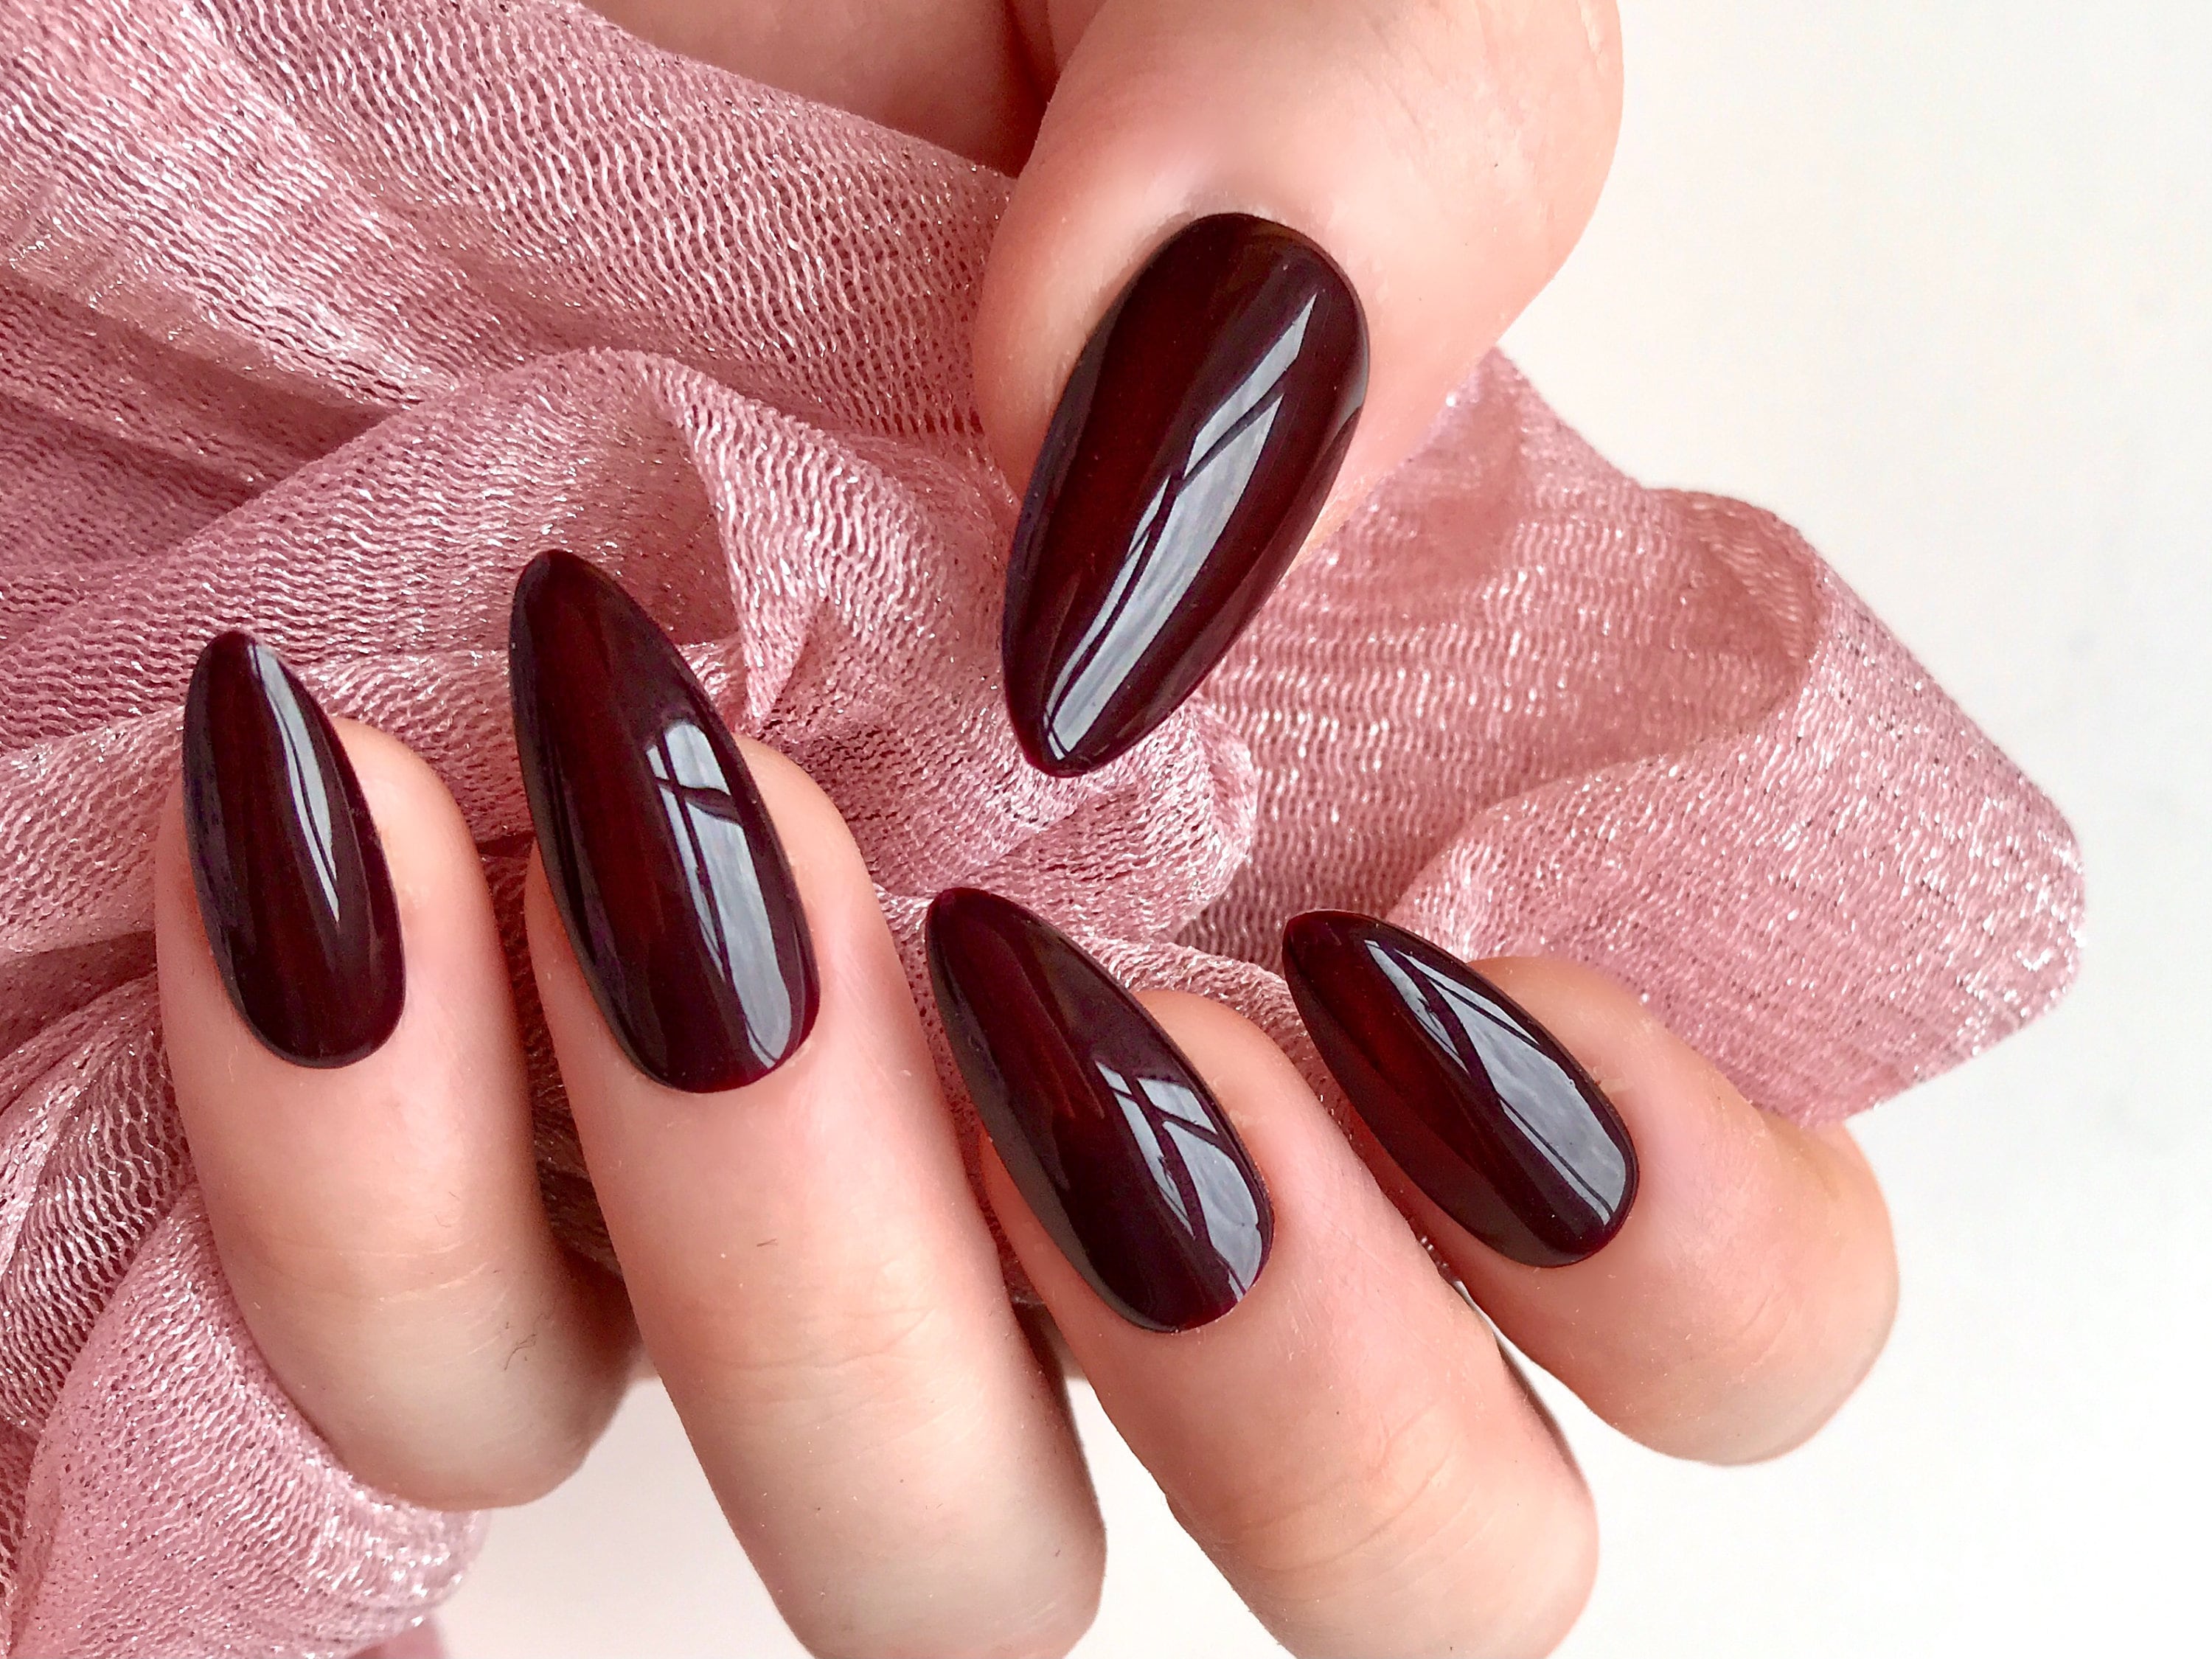 Scintillate, Wine red nail polish